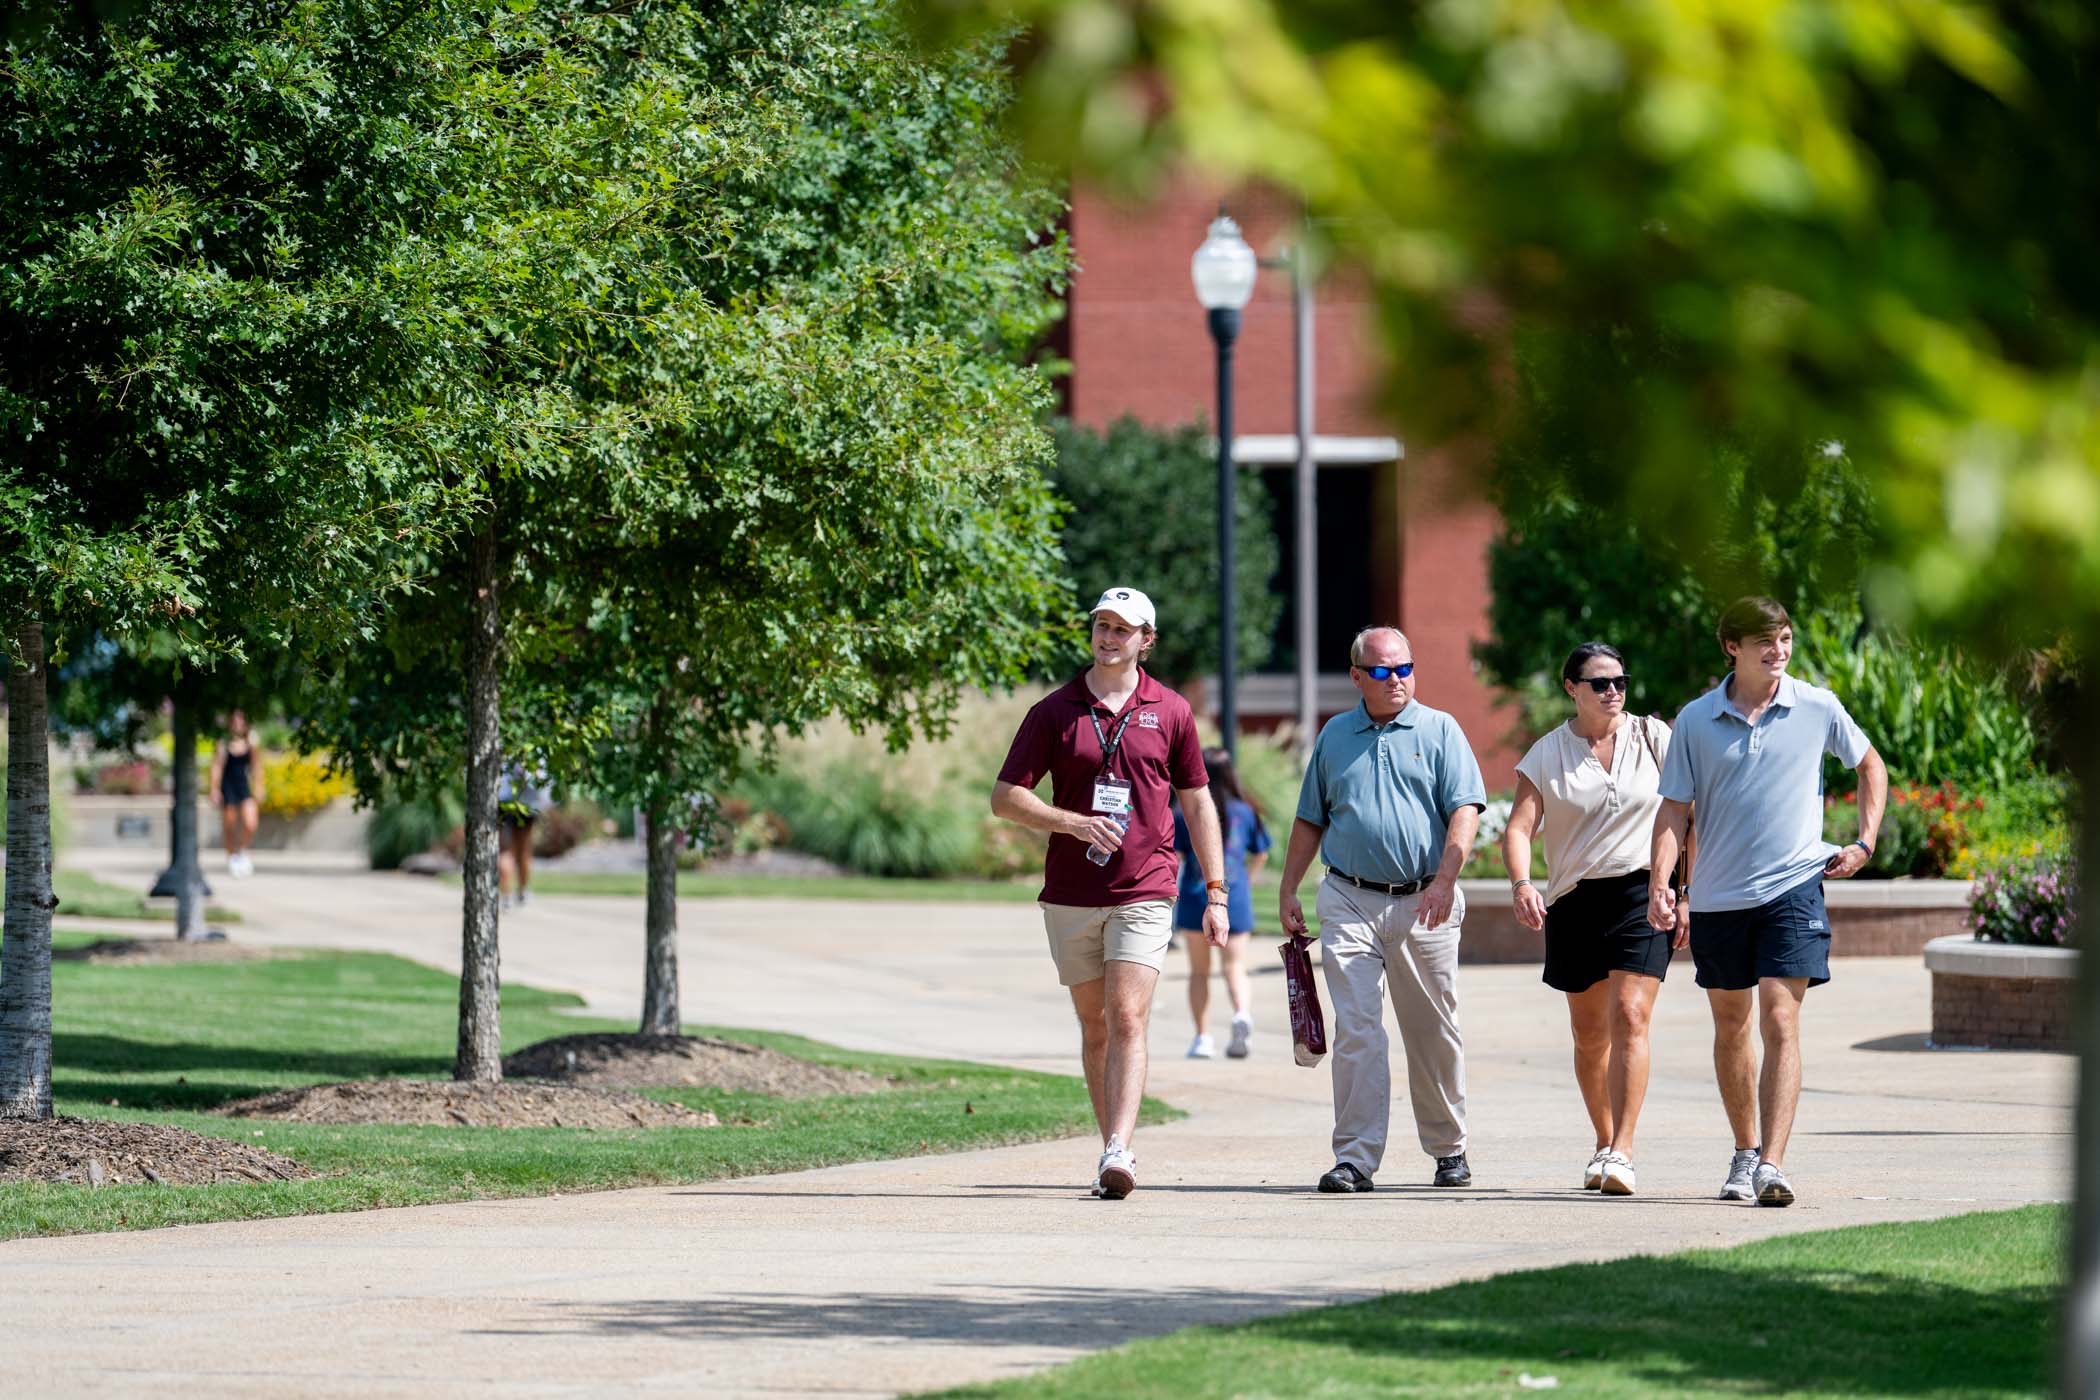 Christian Watson, an MSU roadrunner and senior electrical engineering student from Madison, leads a guided group tour, across campus.